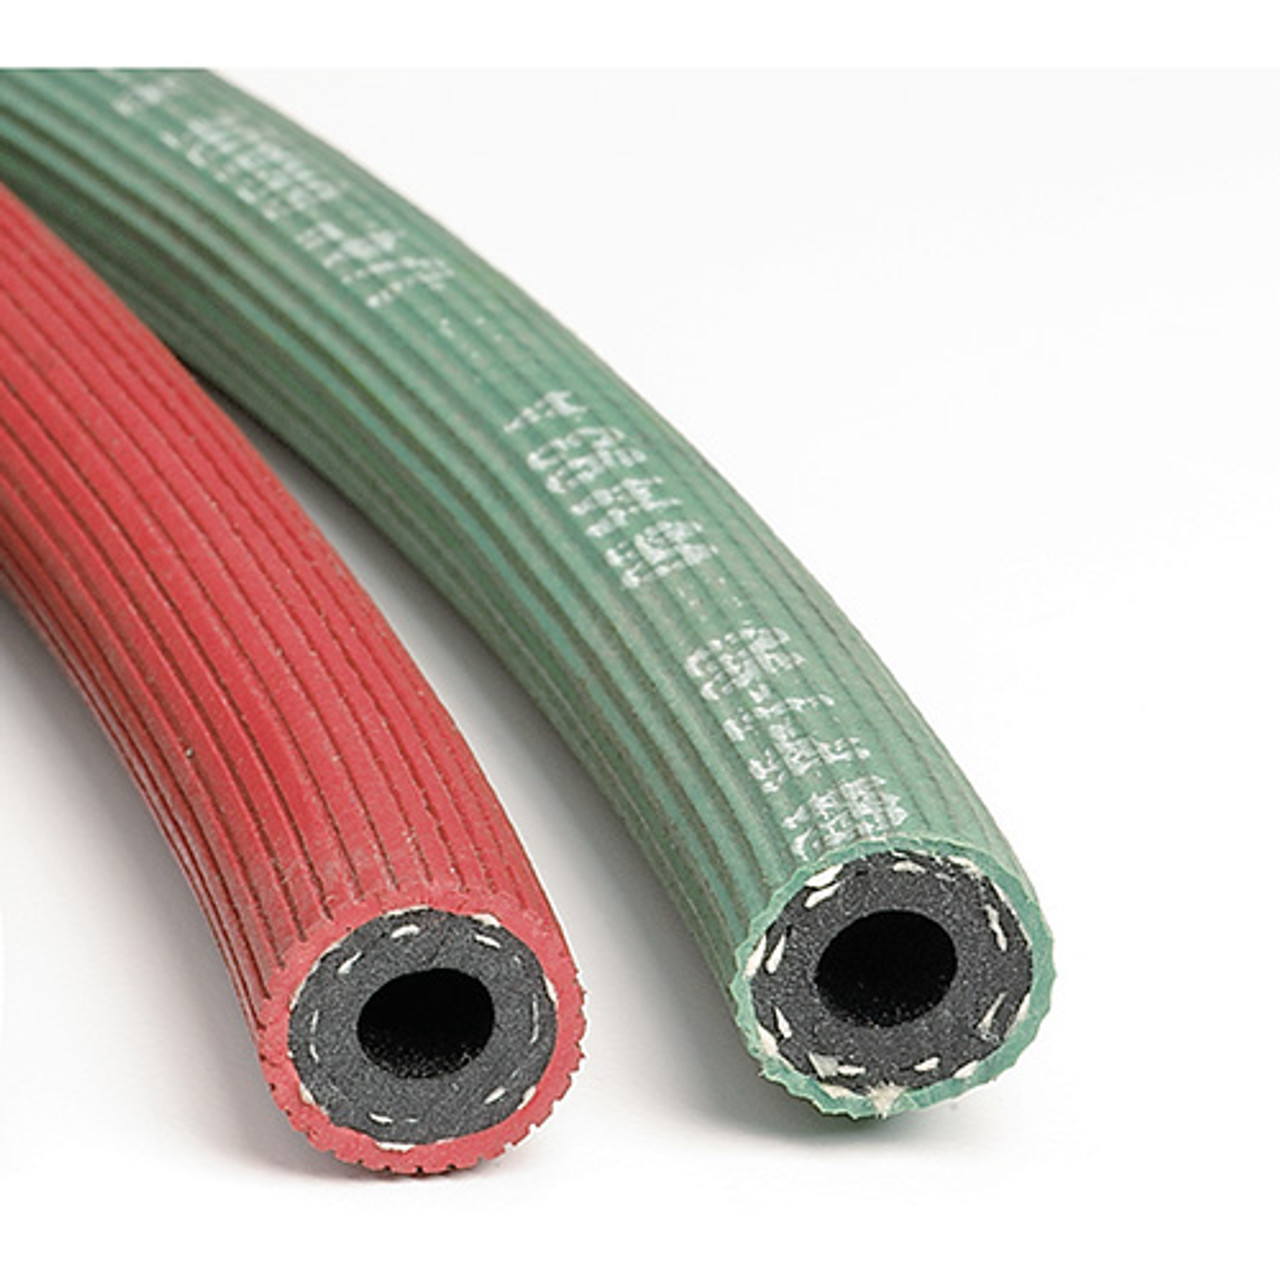 Rubber Hose - Pair of Red + Green